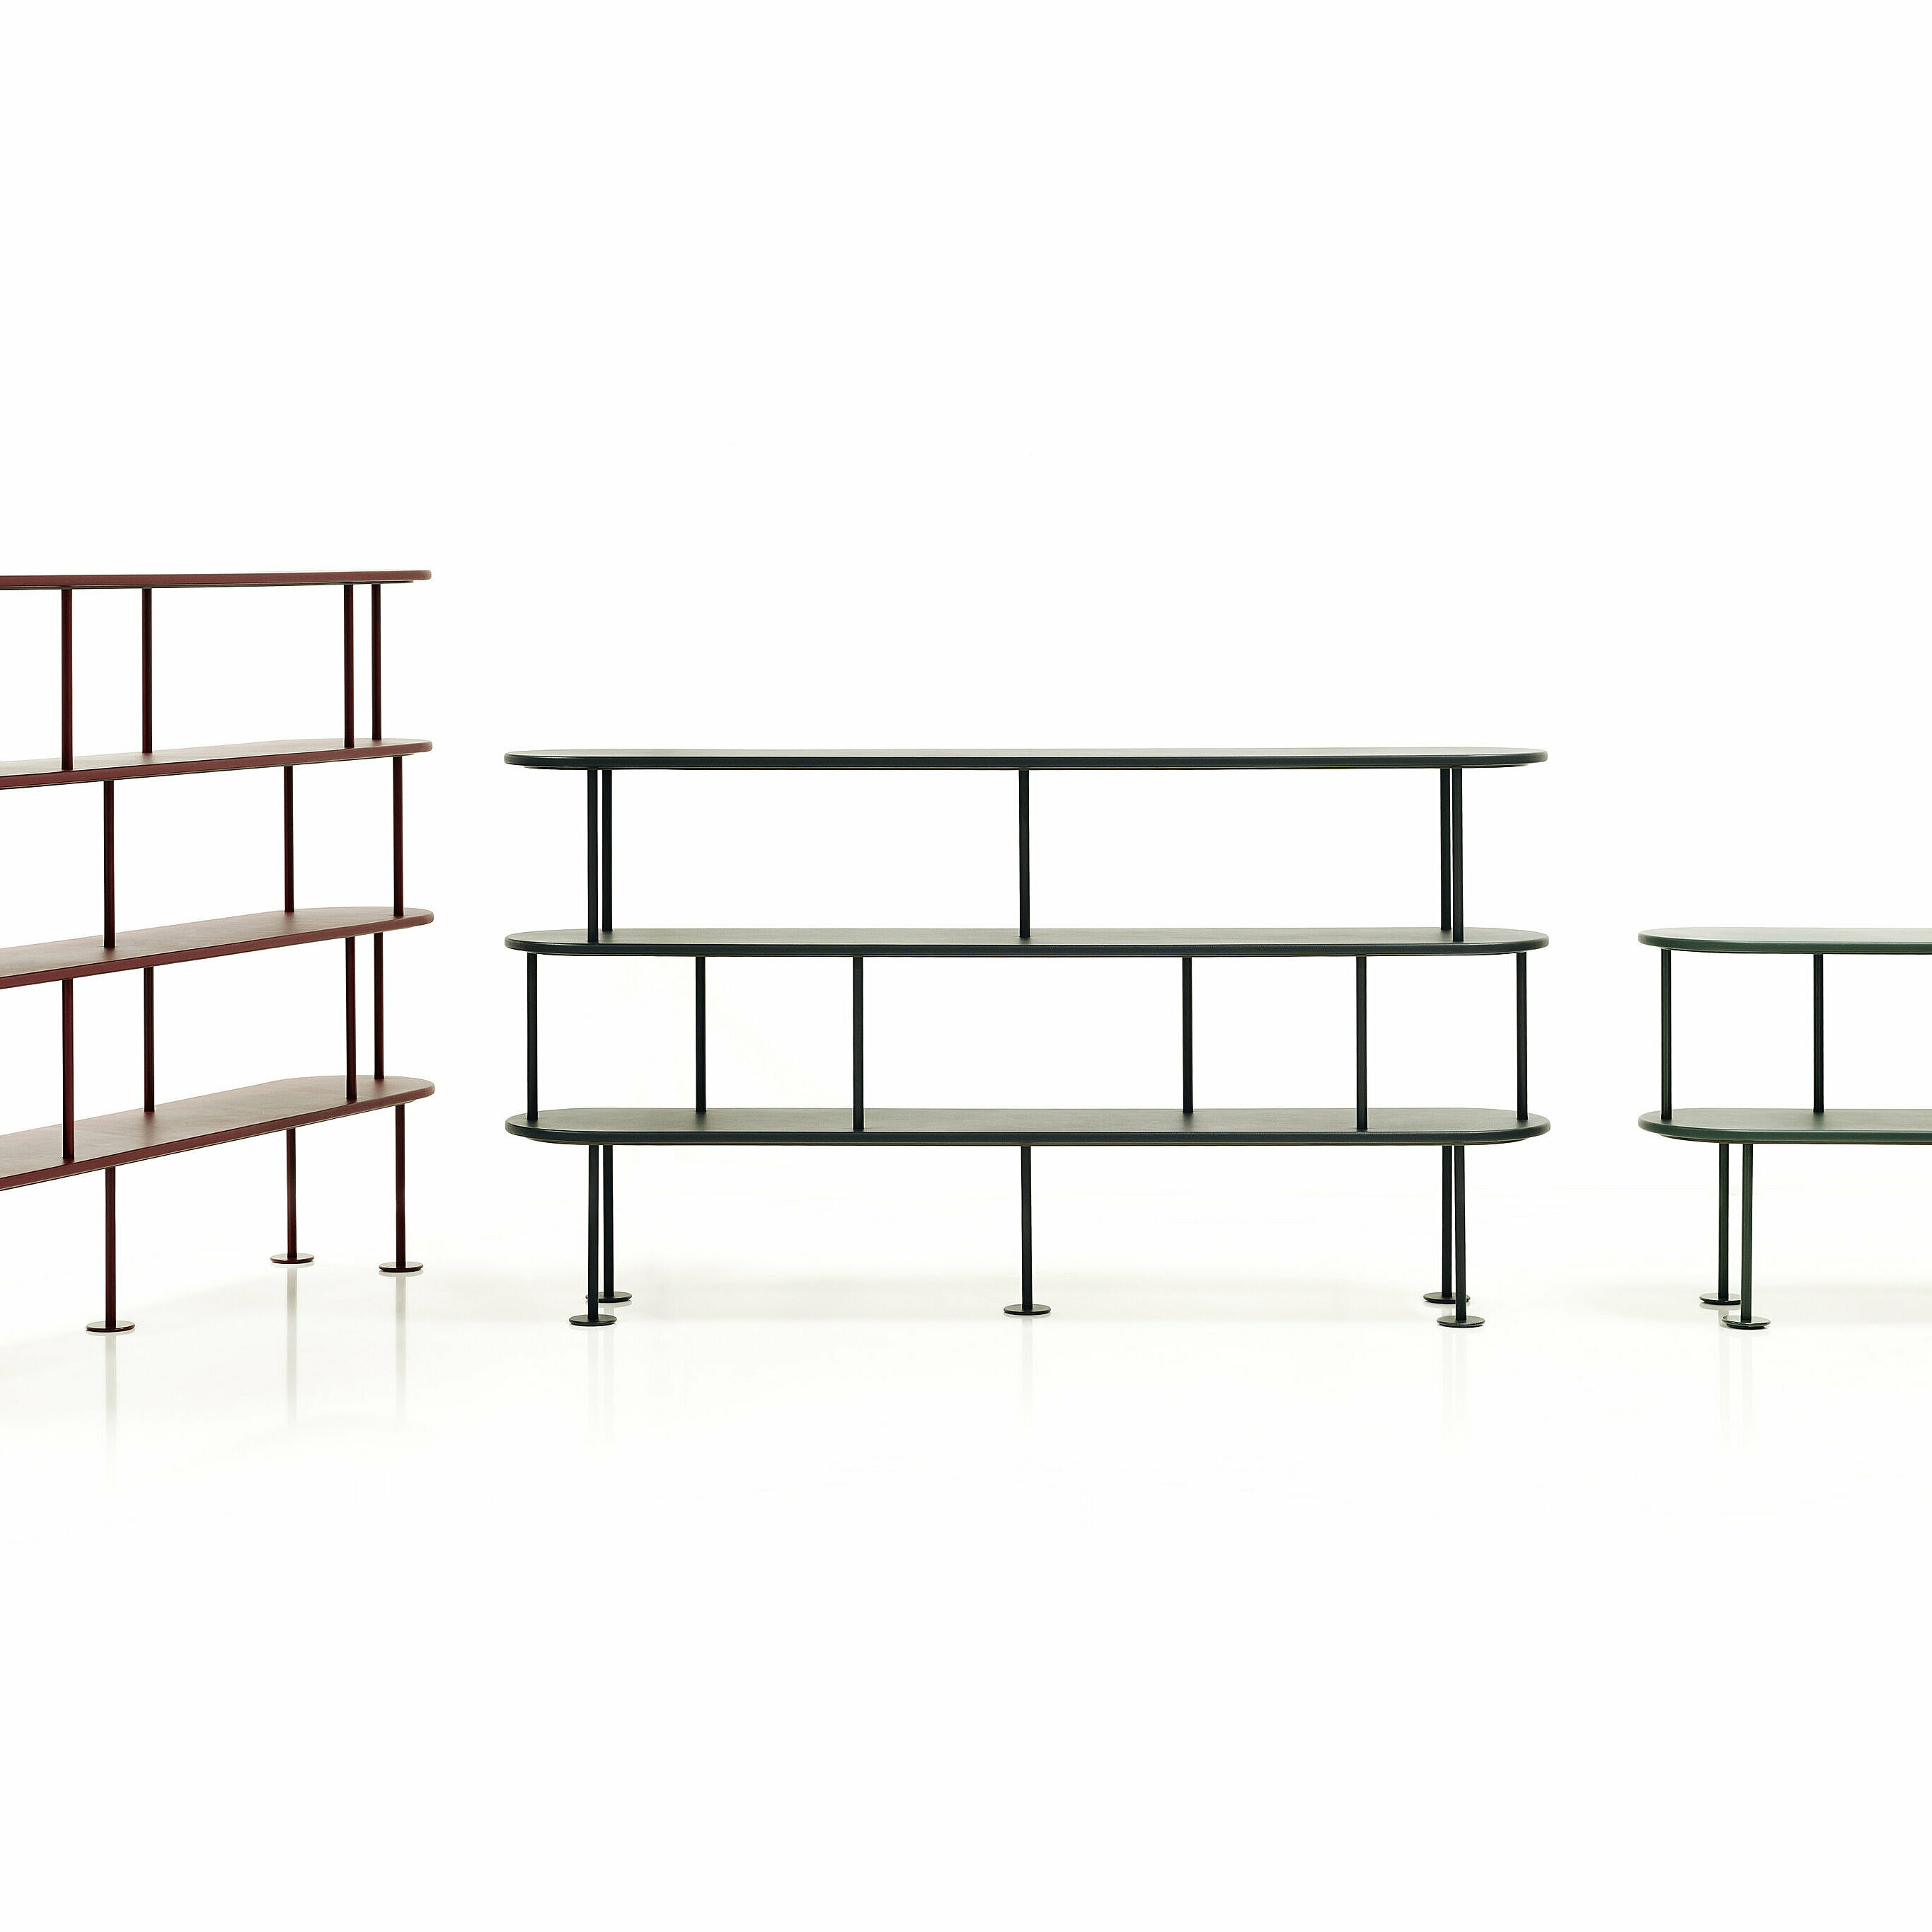 MD Shelf group 70, 105 and 140cm height, shelves in leather nappa dark red, nappa black, nappa verde